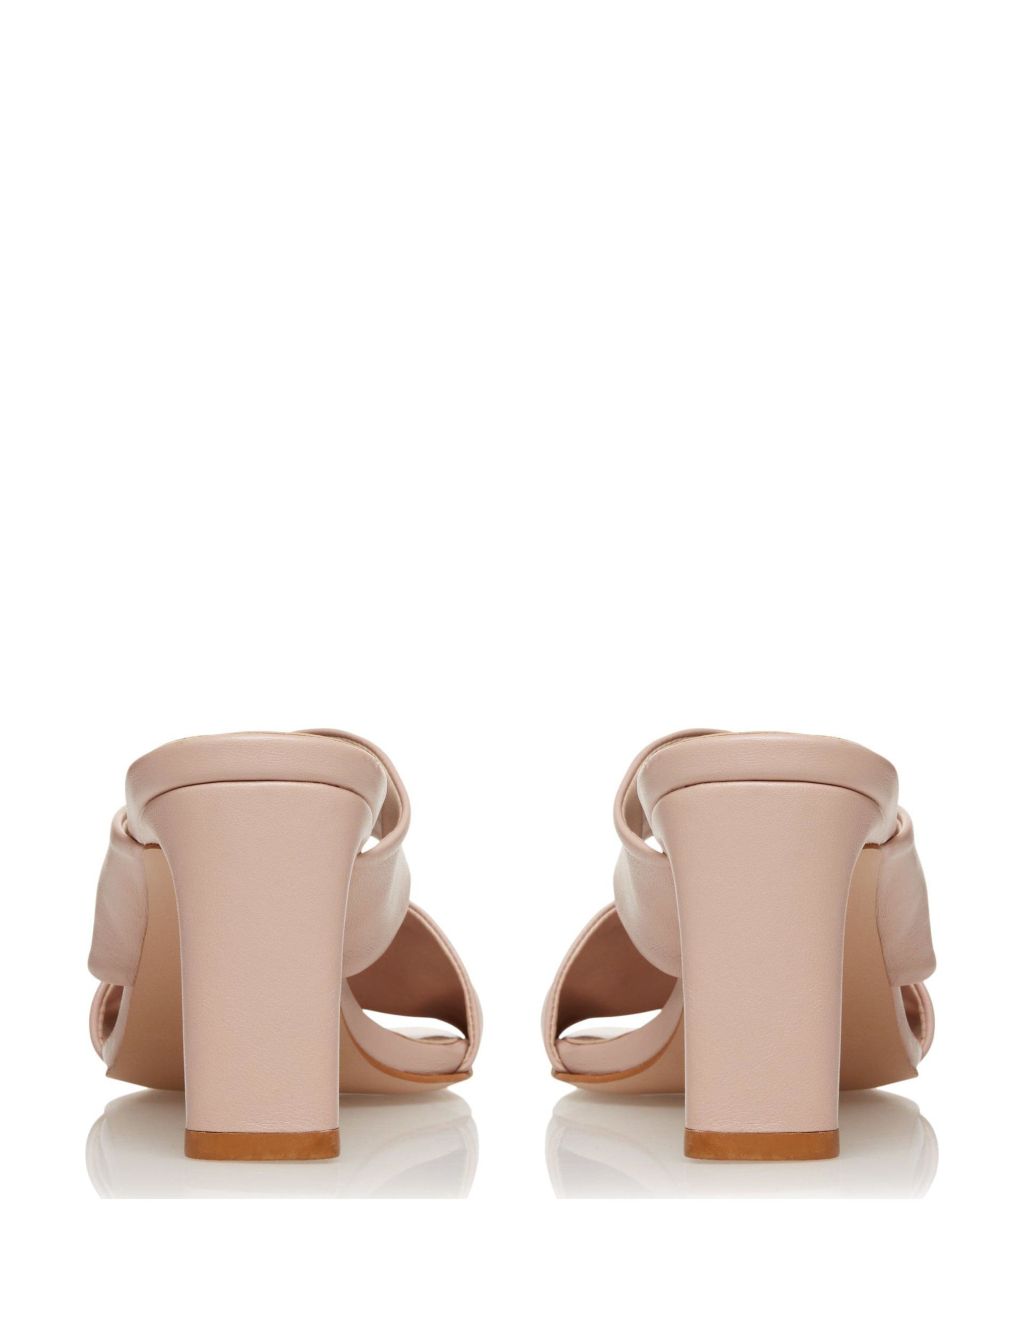 Leather Knot Block Heel Mules image 4